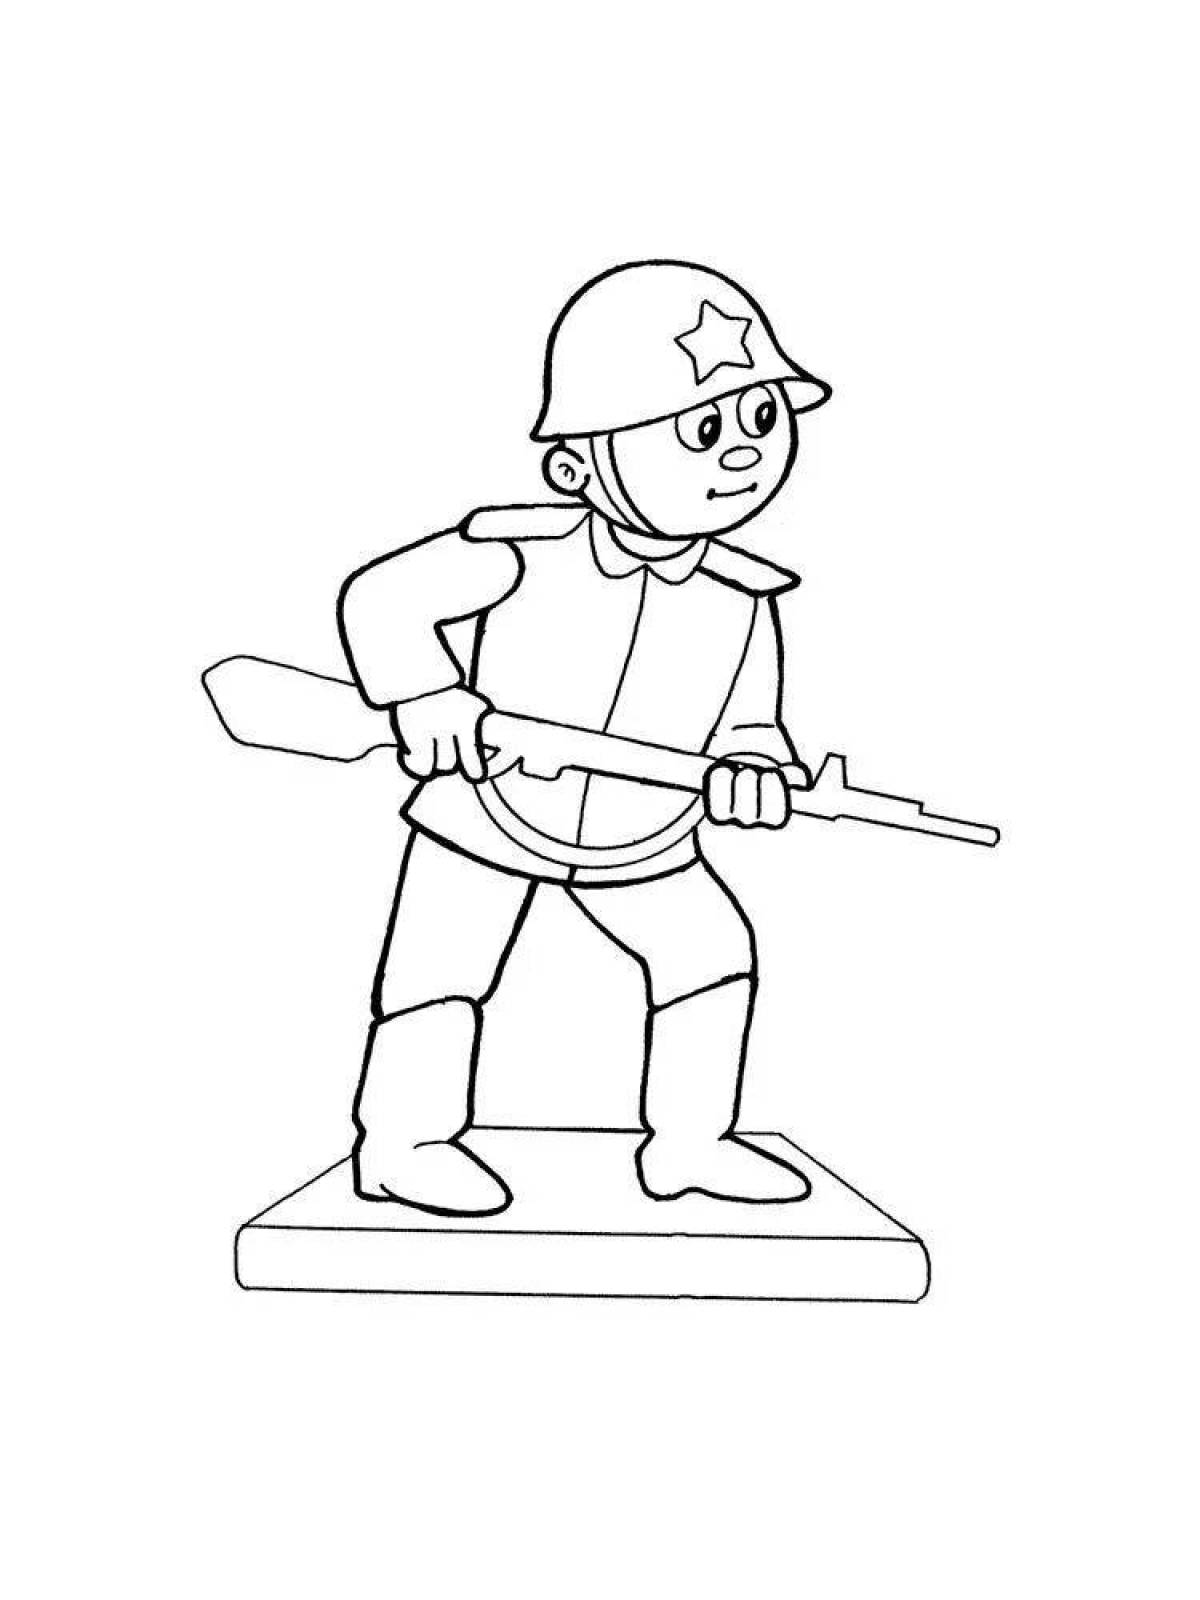 Wonderful soldier coloring for children